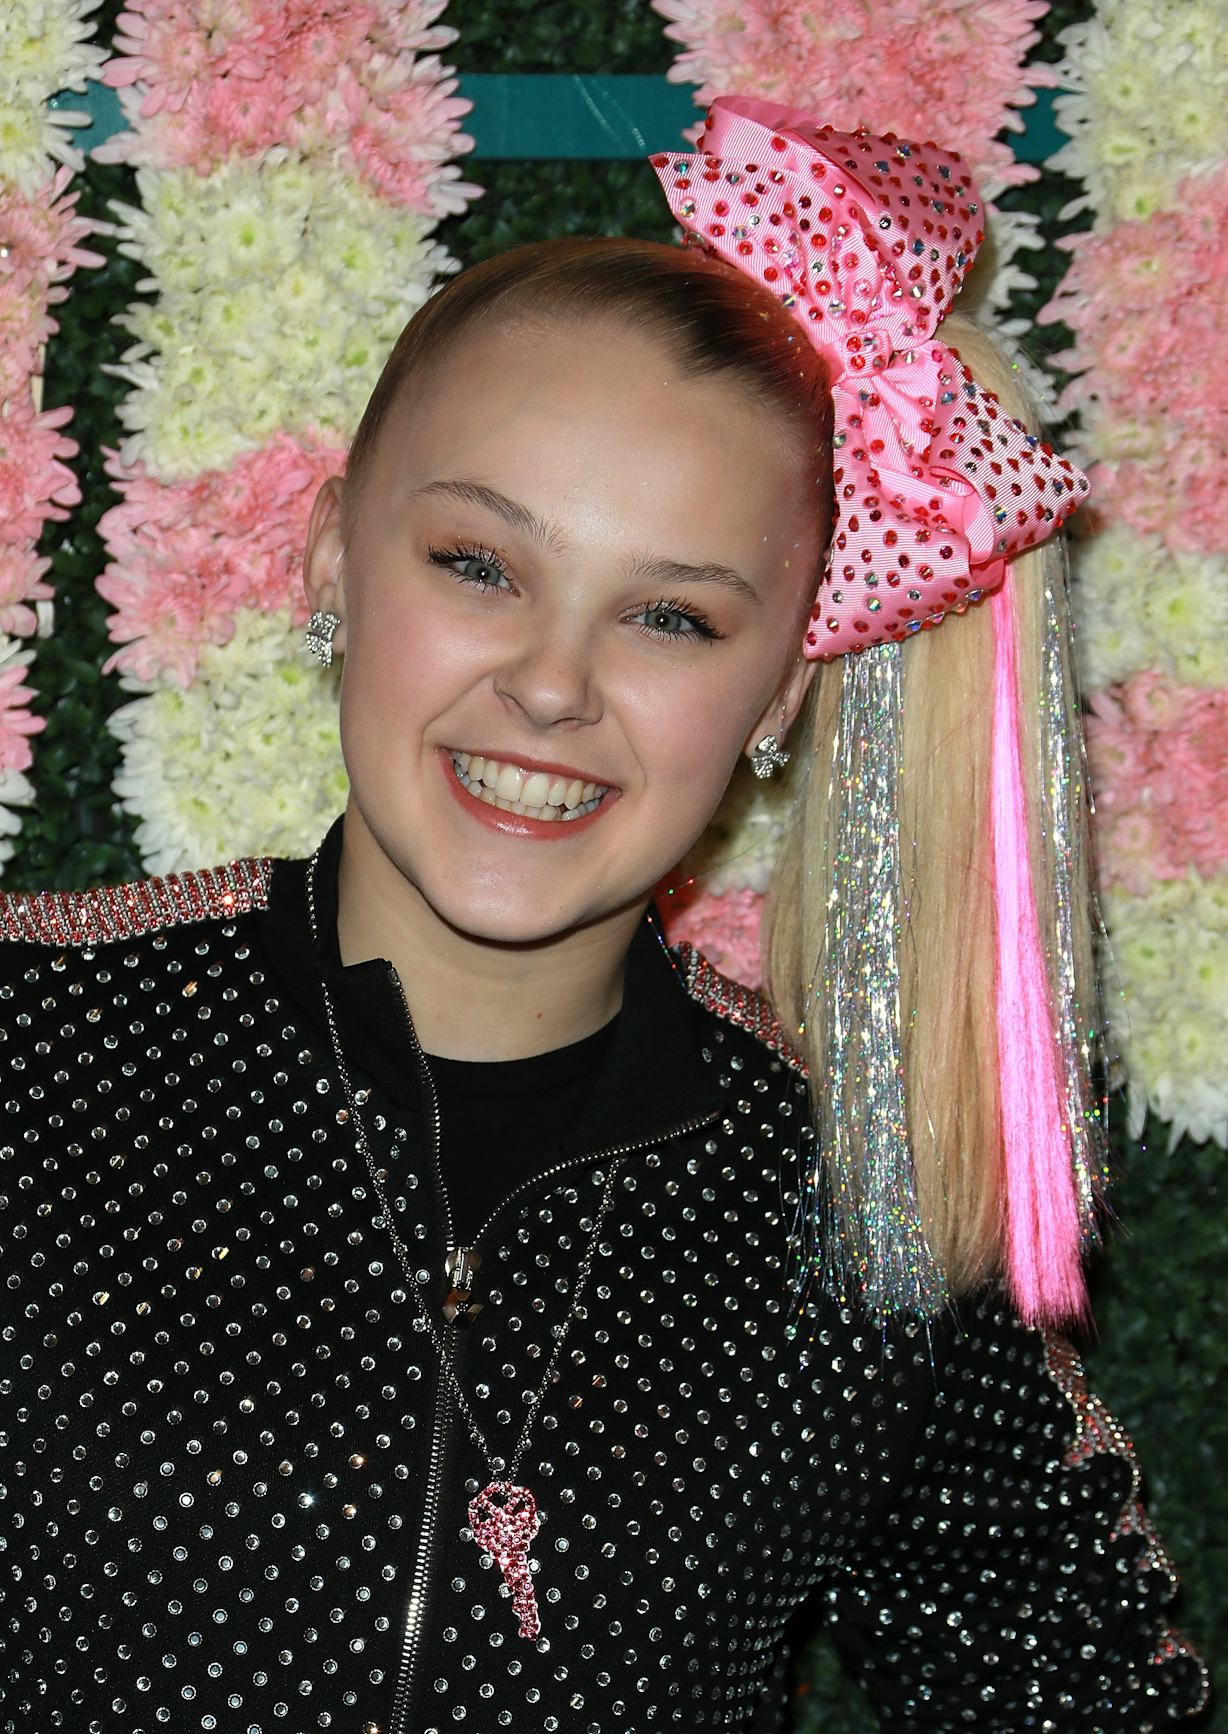 JoJo Siwa Is Going On Tour & Tickets Will Be On Sale Just In Time For